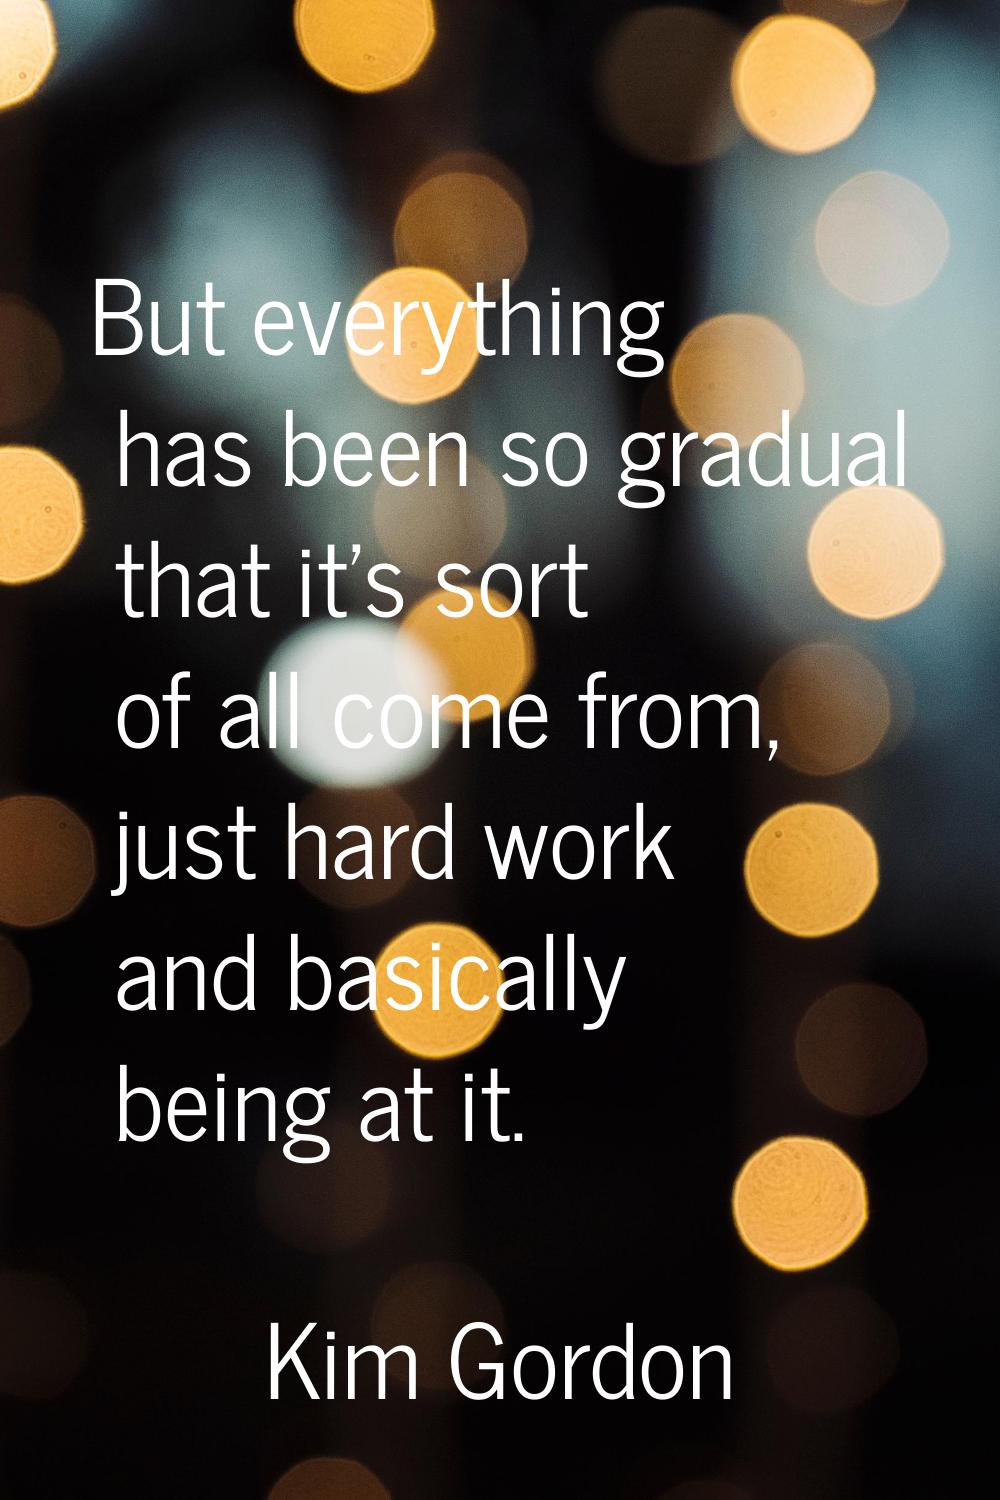 But everything has been so gradual that it's sort of all come from, just hard work and basically be